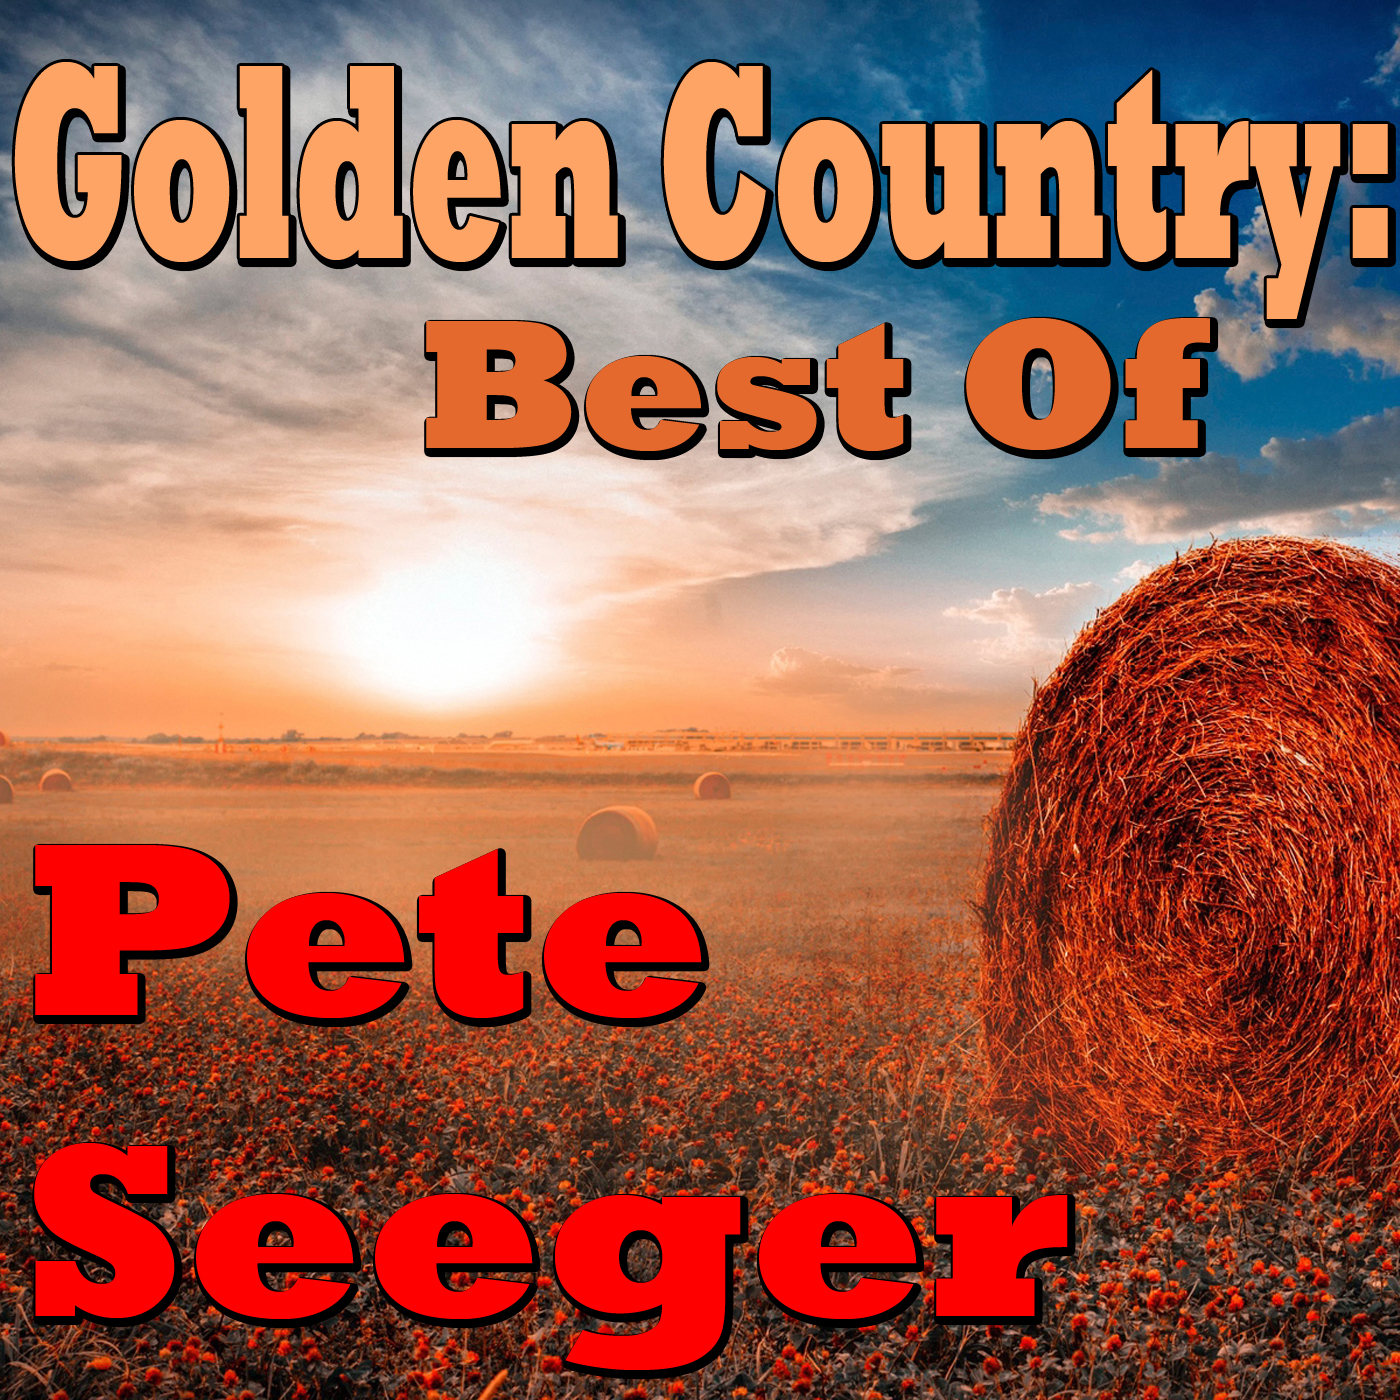 Golden Country: Best Of Pete Seeger